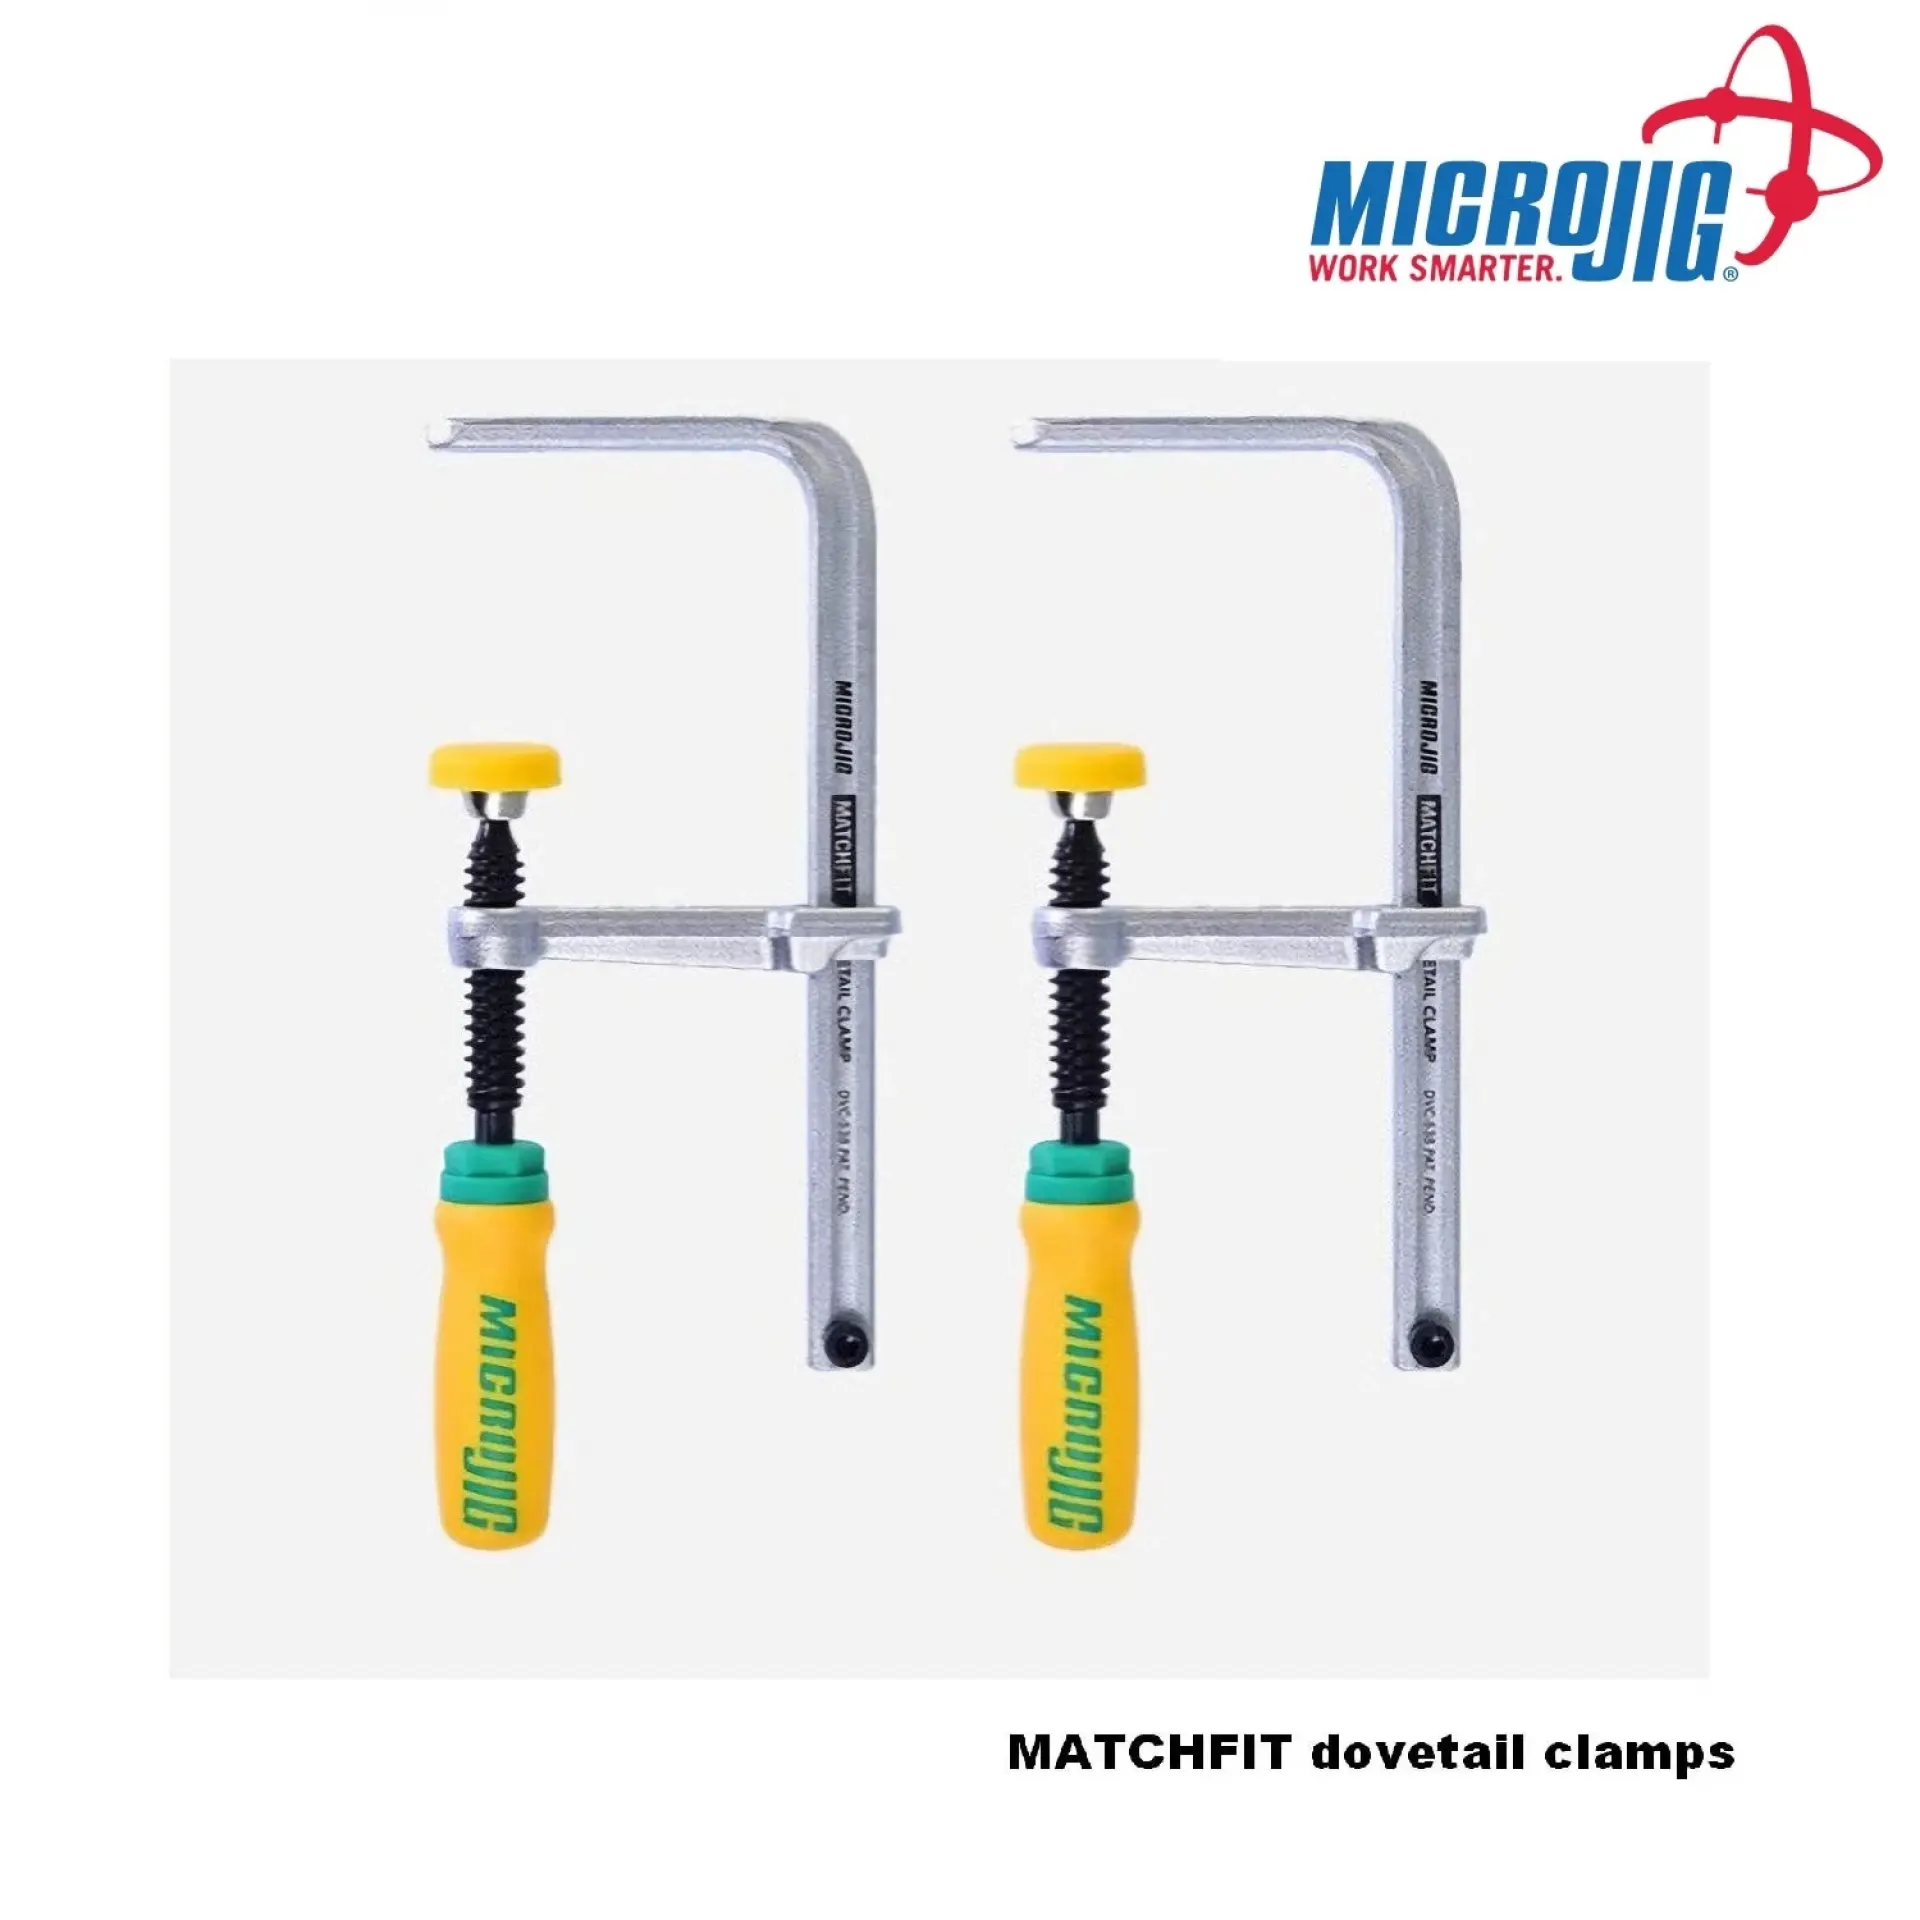 matchfit-dovetail-clamps-microjig.